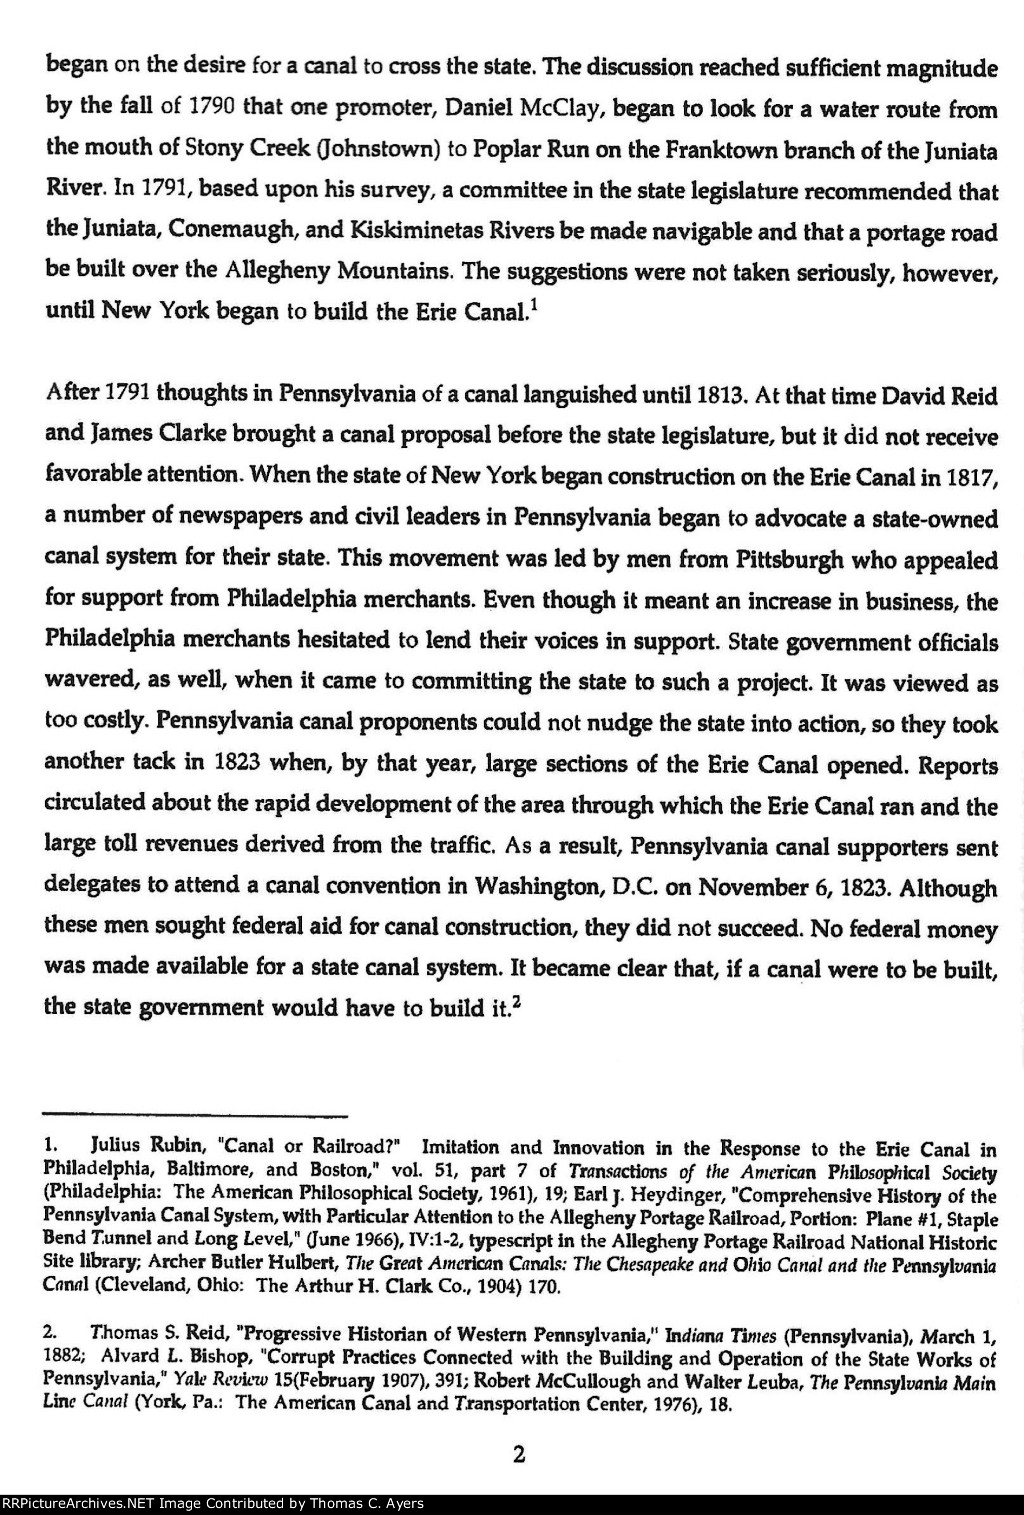 "Pennsylvania Main Line Canal," Page 2, 1993